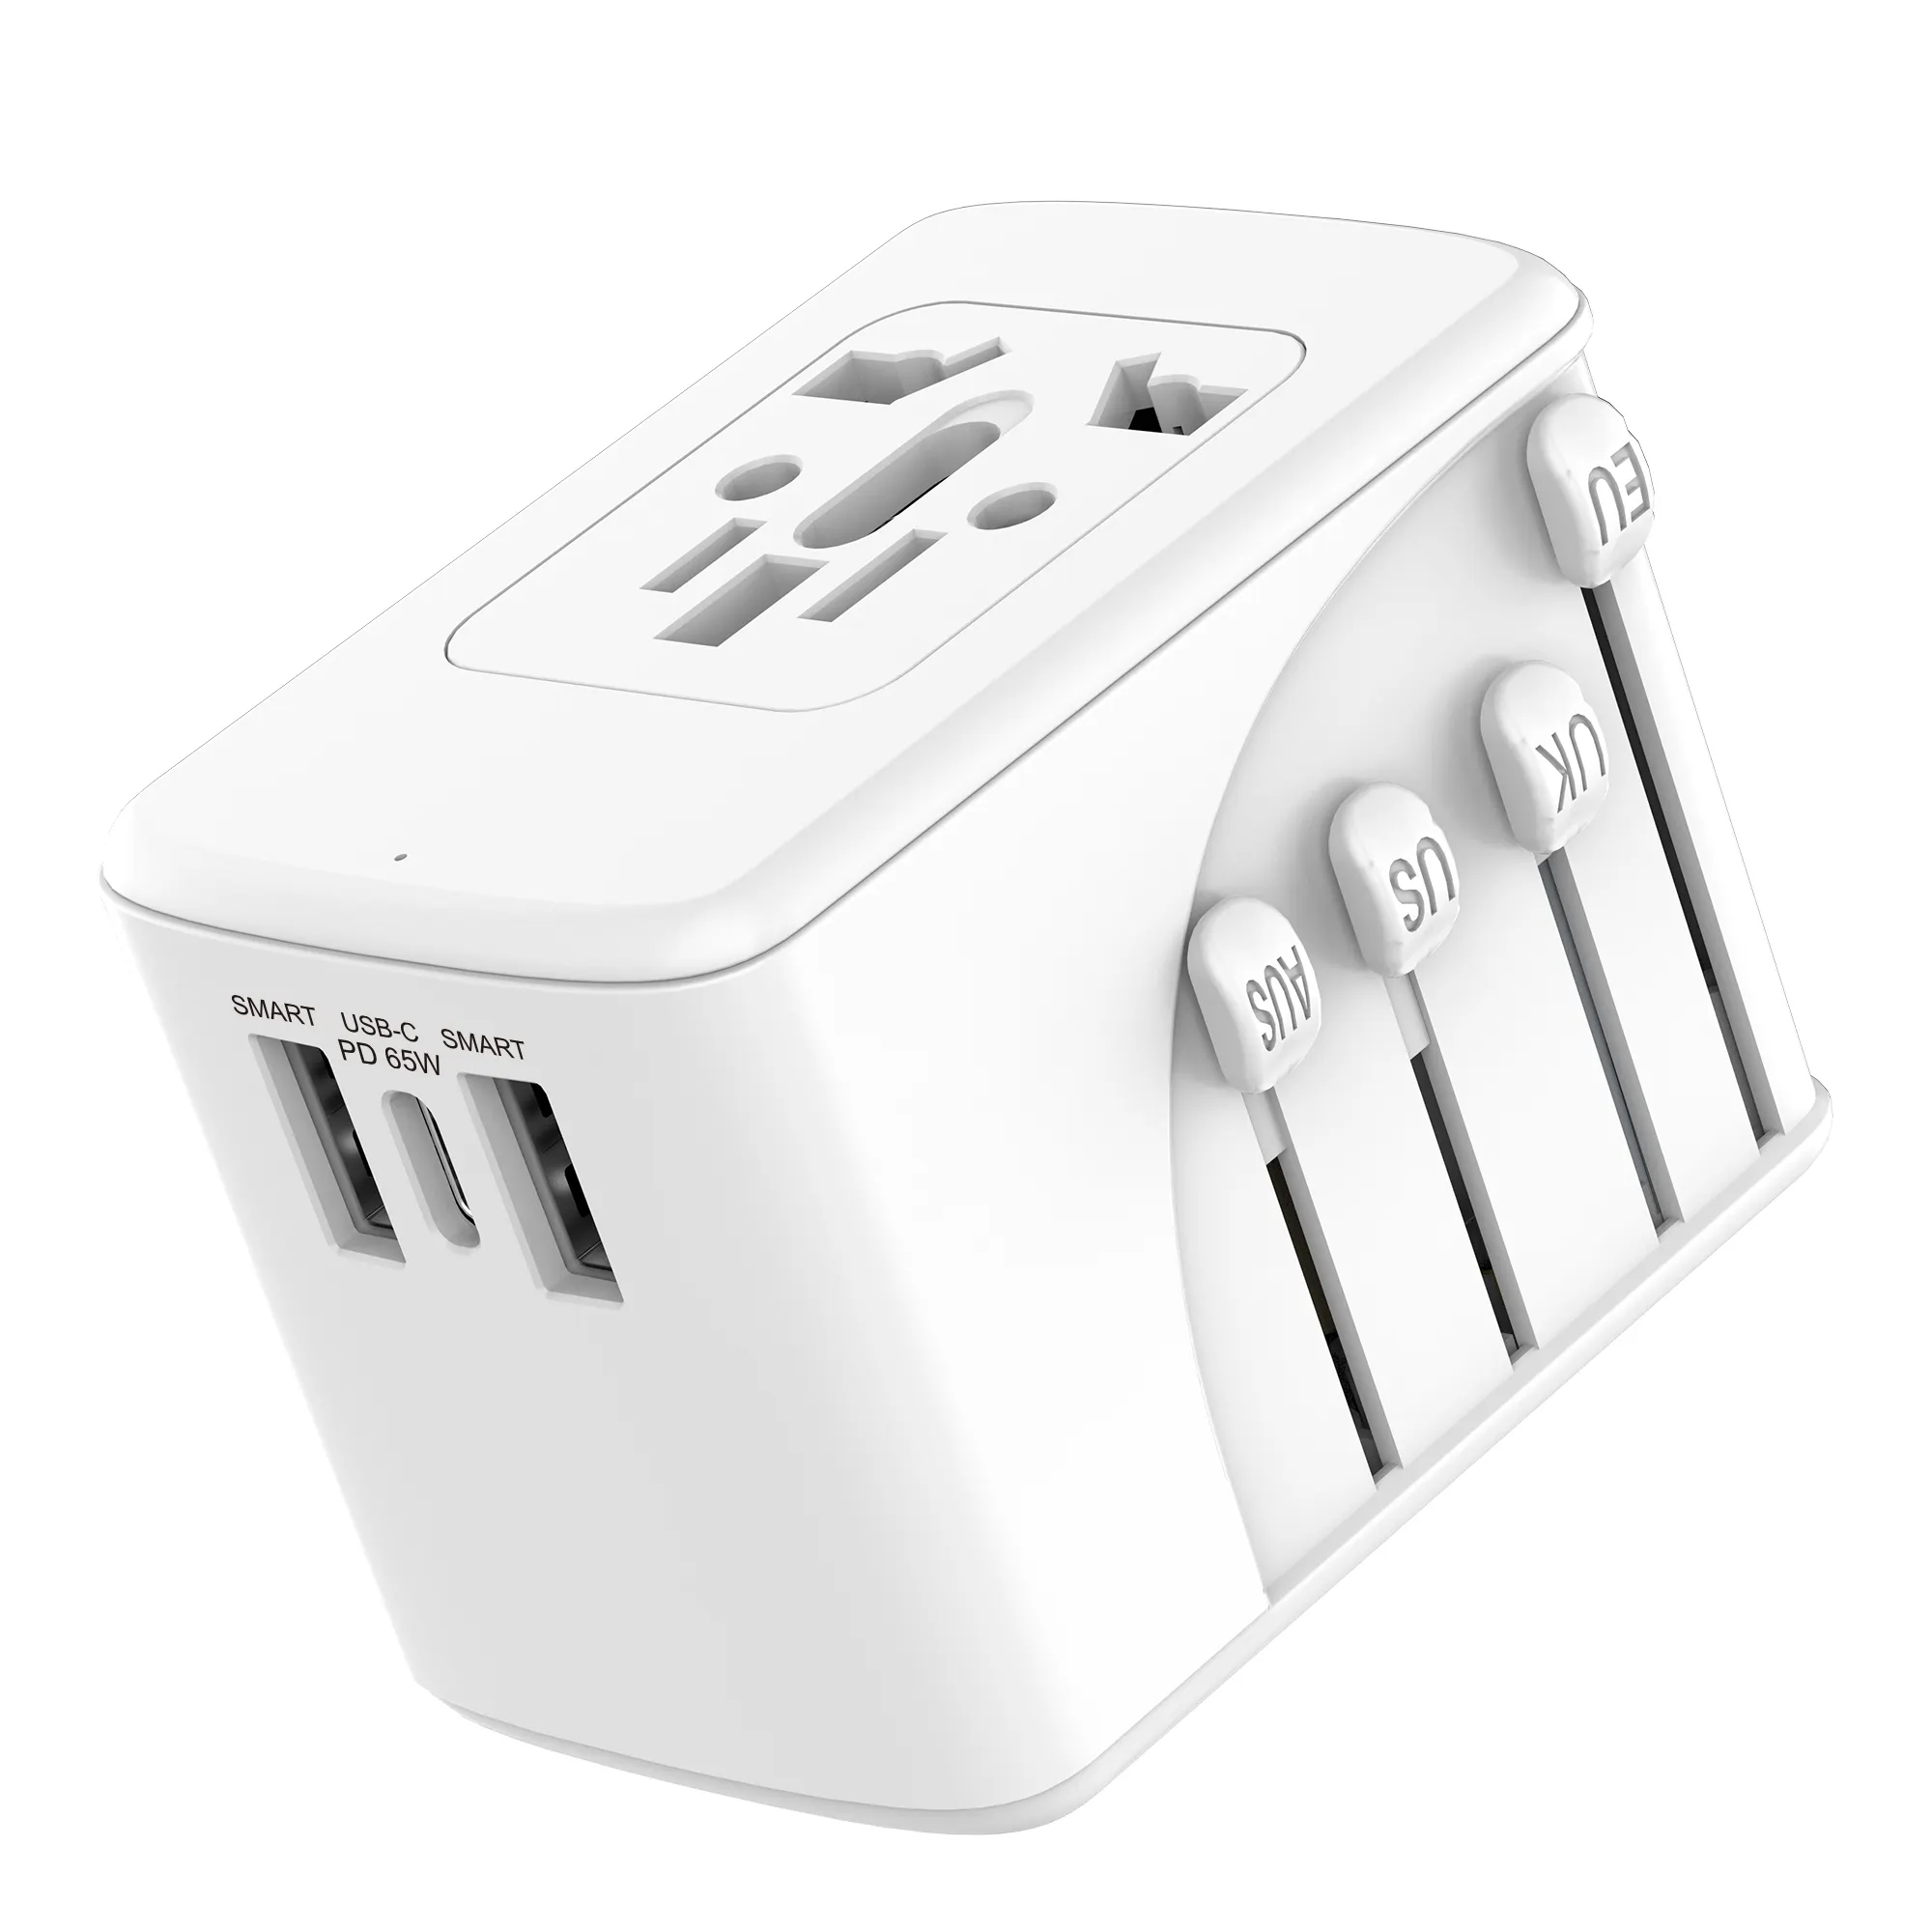 Travel Adapter Universal All in One Worldwide Travel Adapter Power Converters Wall Charger AC Power Plug Adapter with 2USB+1C